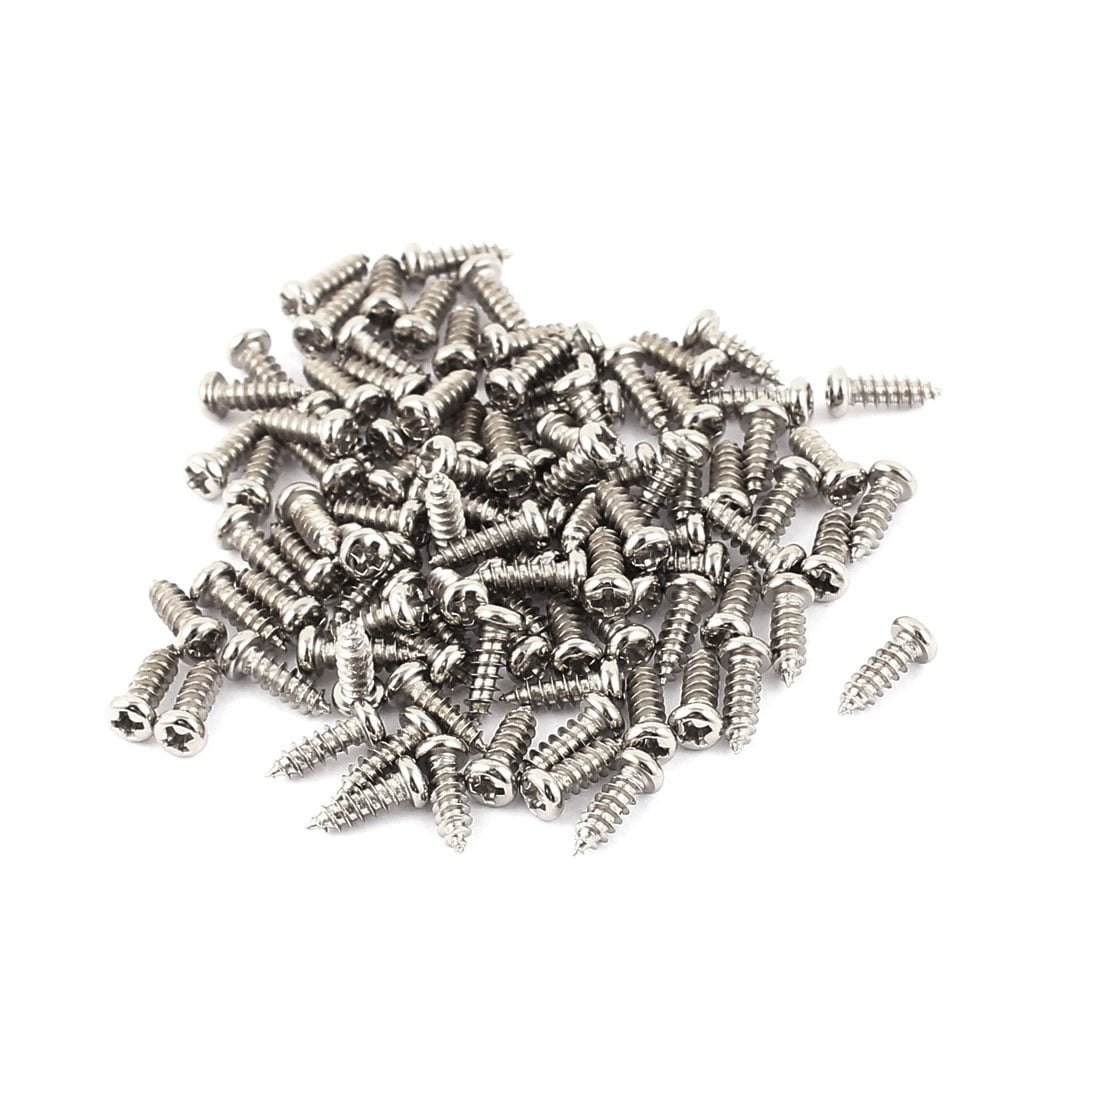 100pcs M1.5 x 8mm Stainless Steel Phillips Pan Round Head Self Tapping Screws 